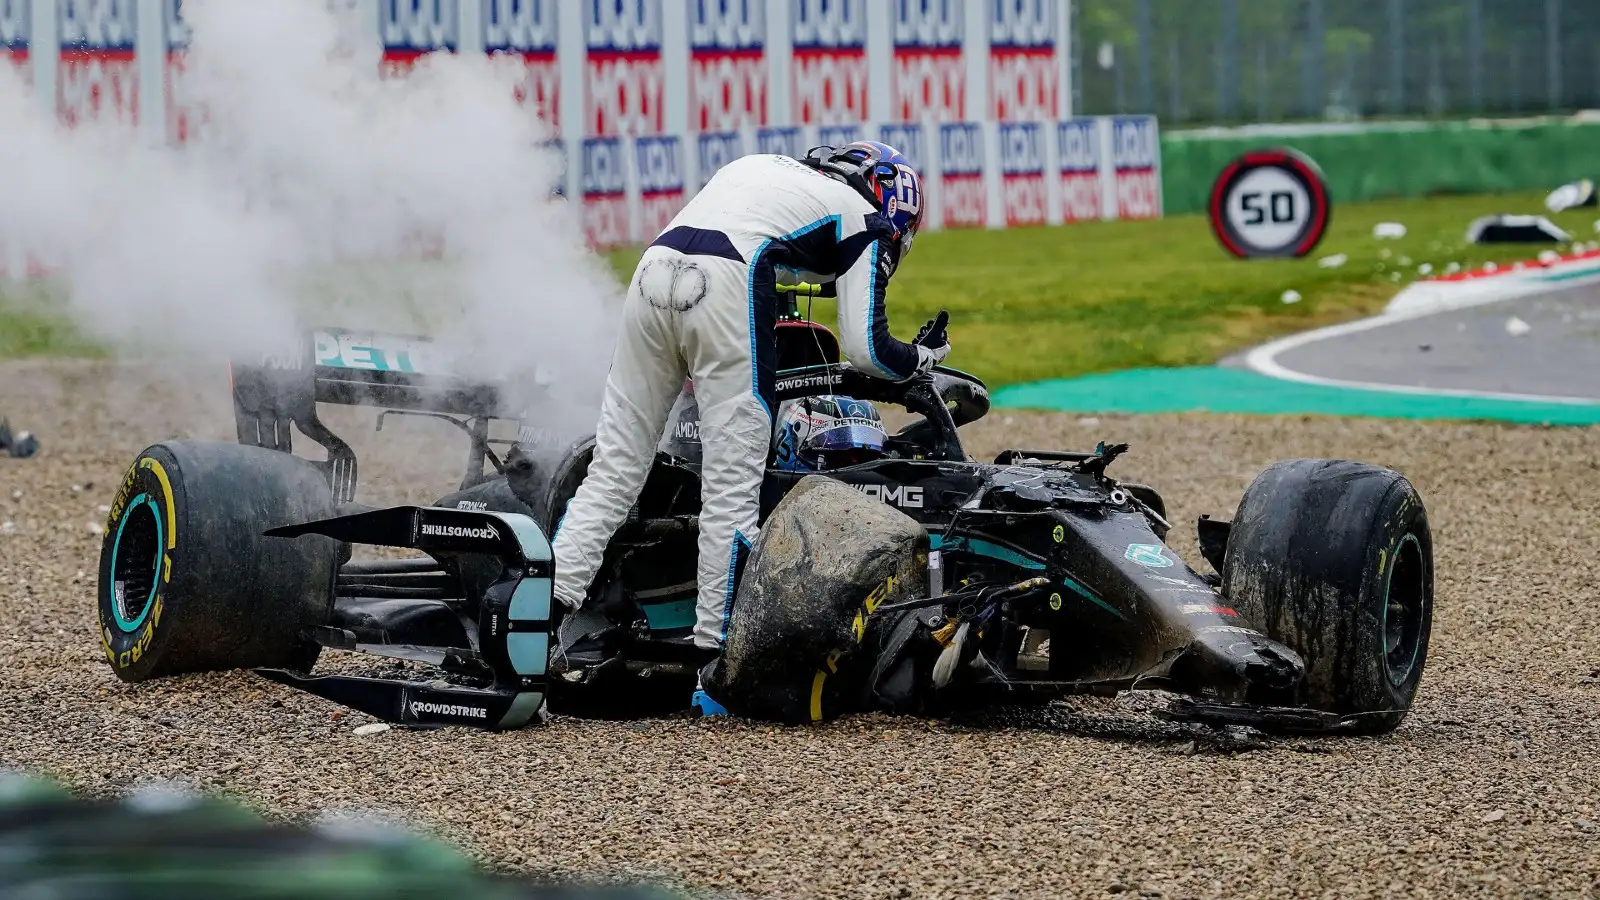 Williams' George Russell confronts Mercedes' Lewis Hamilton following their collision at the 2021 Emilia Romagna Grand Prix.